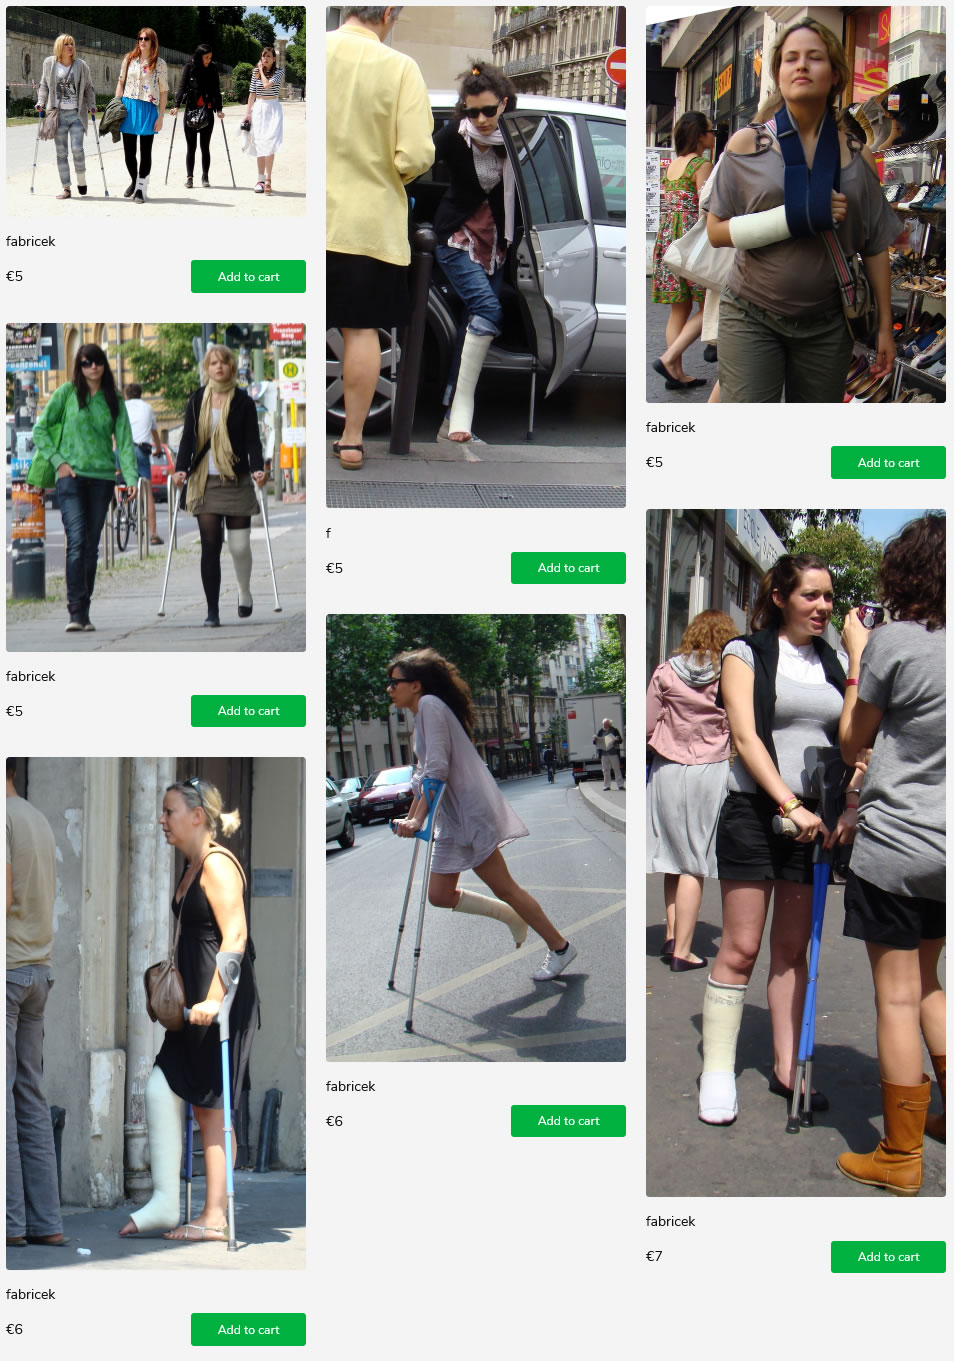 6 sets of french women in different casts: SLC, LLC, SAC (sightings & models)